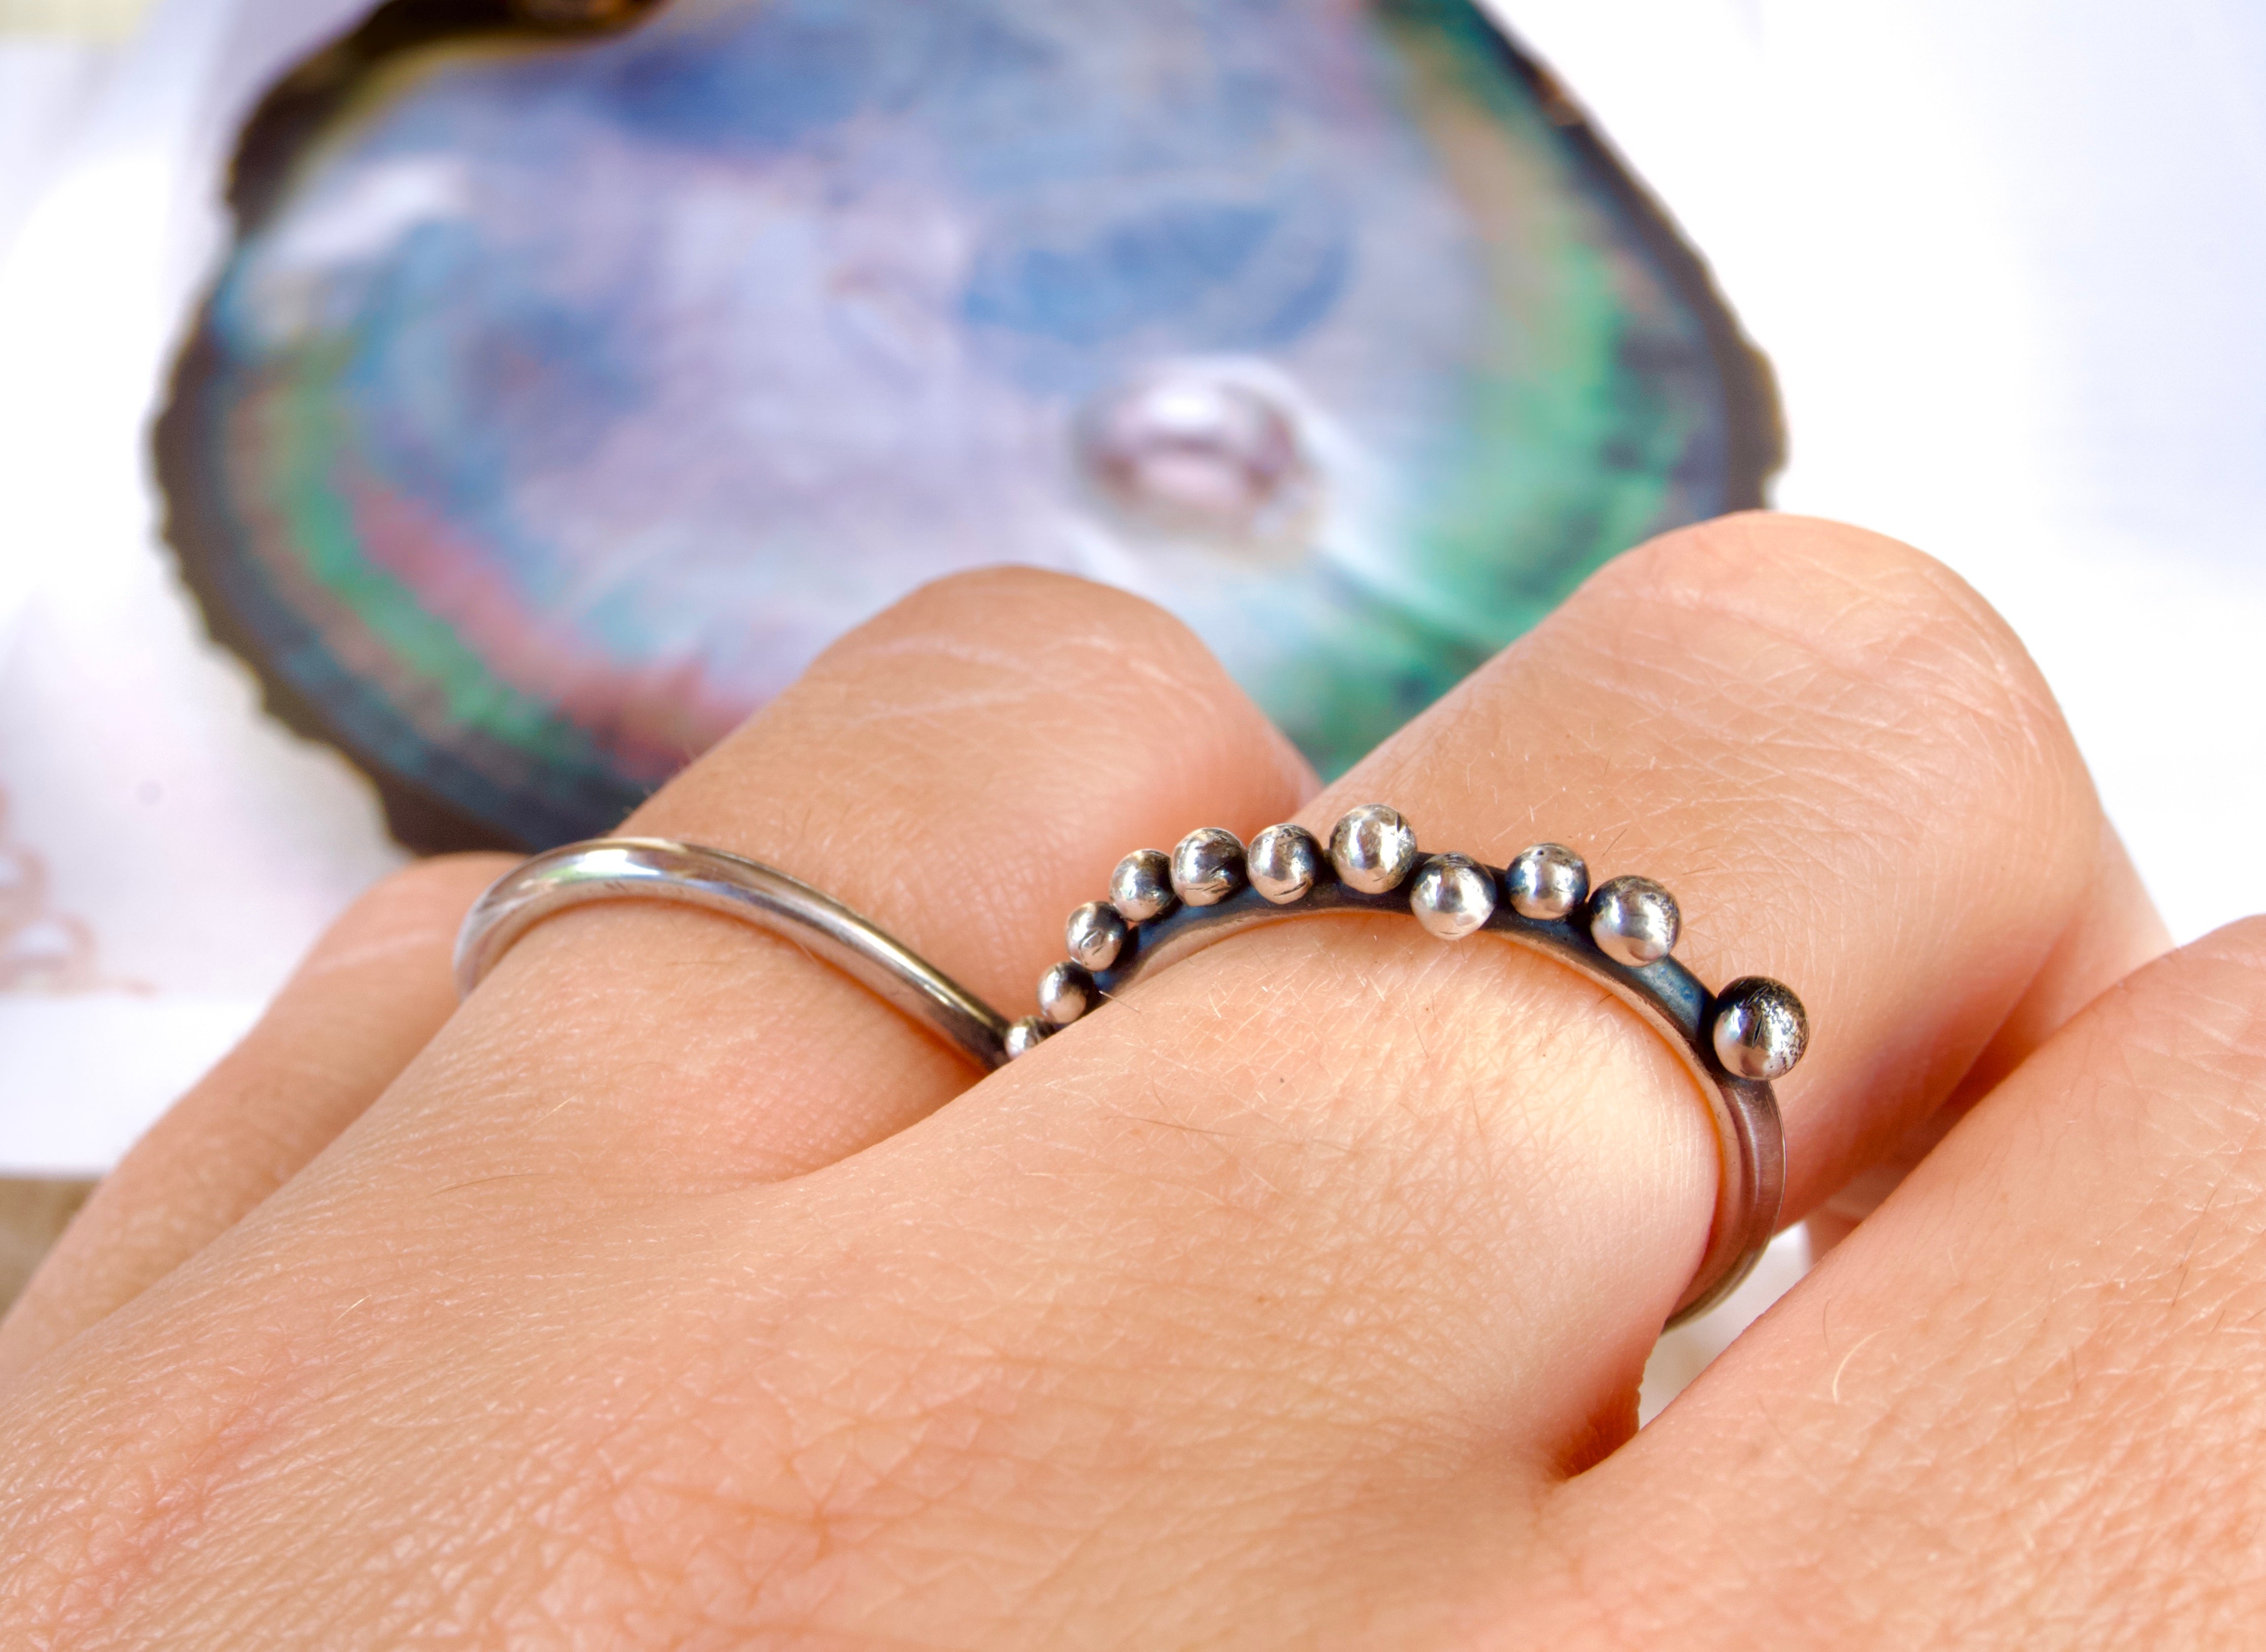 Two Finger Ring - Moonlite / Moon Star/ Chand tare ring